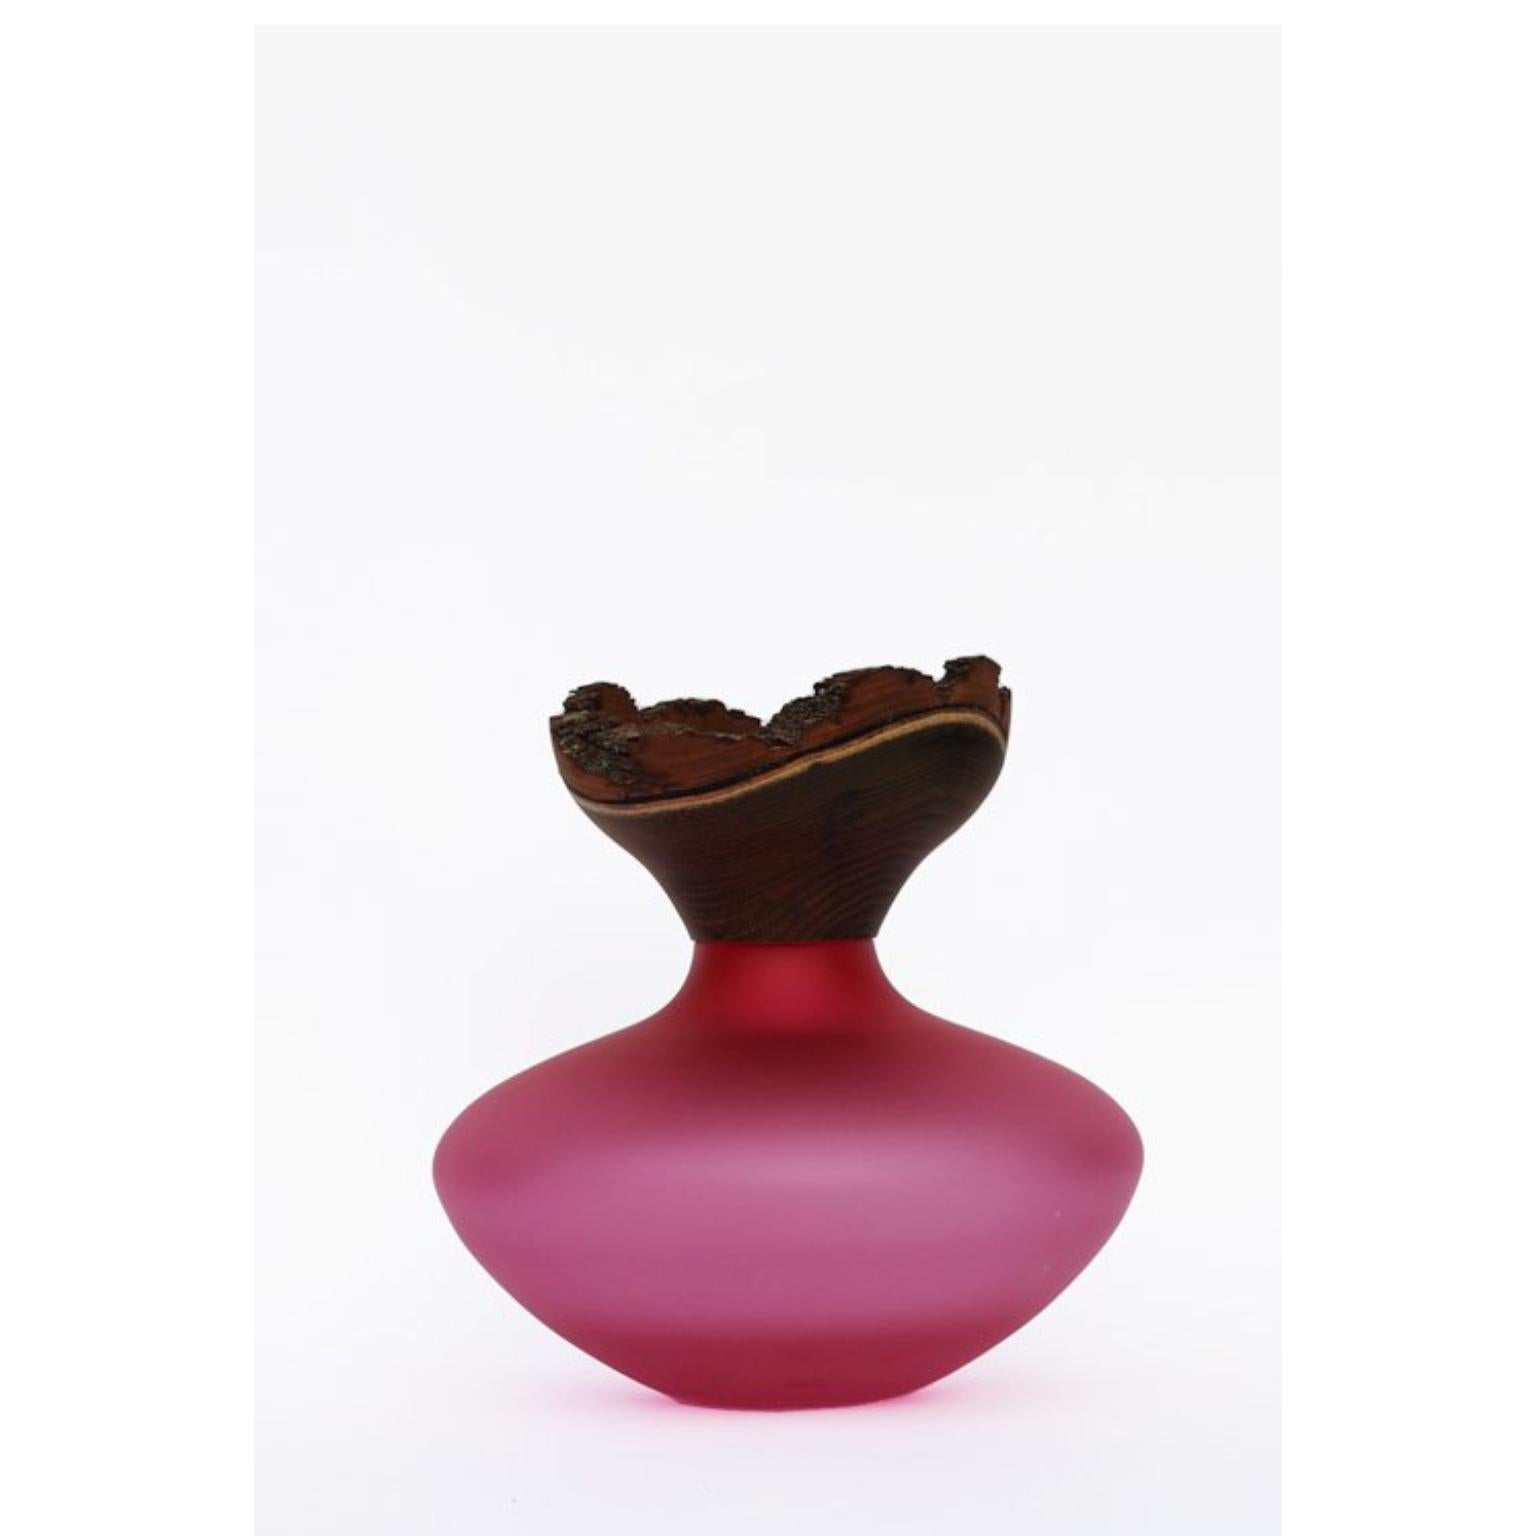 Bloom Stacking Satin Pink Vessel by Pia Wüstenberg
Unique Piece. Handmade In Europe.
Dimensions: Ø 26 x H 26 cm.
Materials: Acacia wood and glass.

Available in different color options. Available in a satin or glossy finish.

Pia Wüstenberg is a